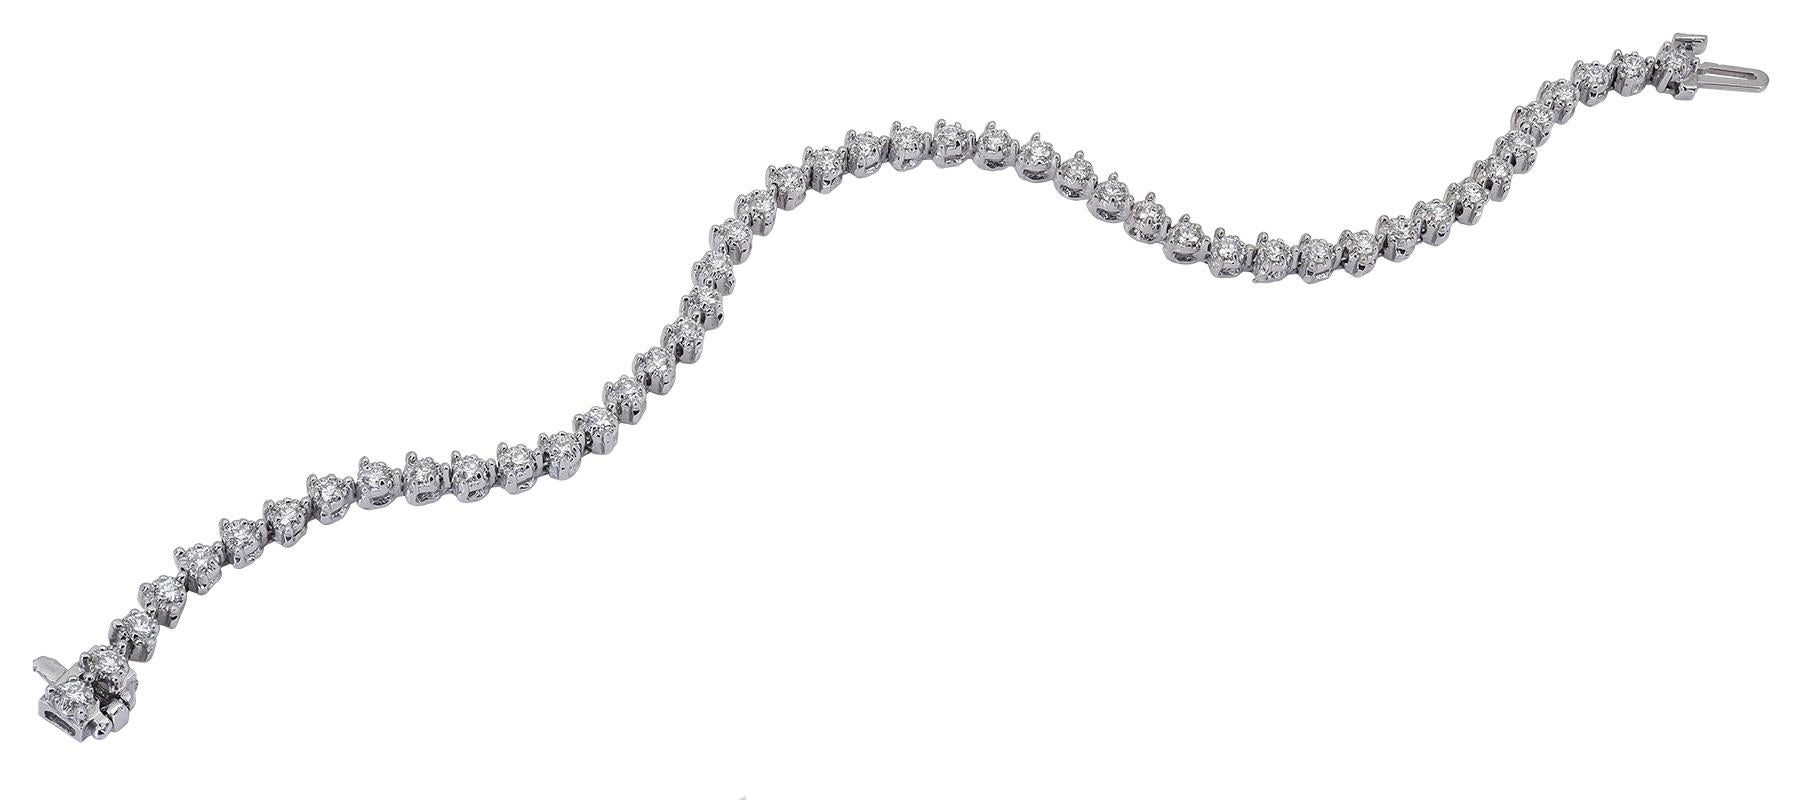  A classic Diamond Tennis bracelet stylized in a 3 prong setting. There are 46 round diamonds weighing 1.50 carats in total, set in 14K white gold material with a box clasp closure. 

This bracelet measures 7 inches long.